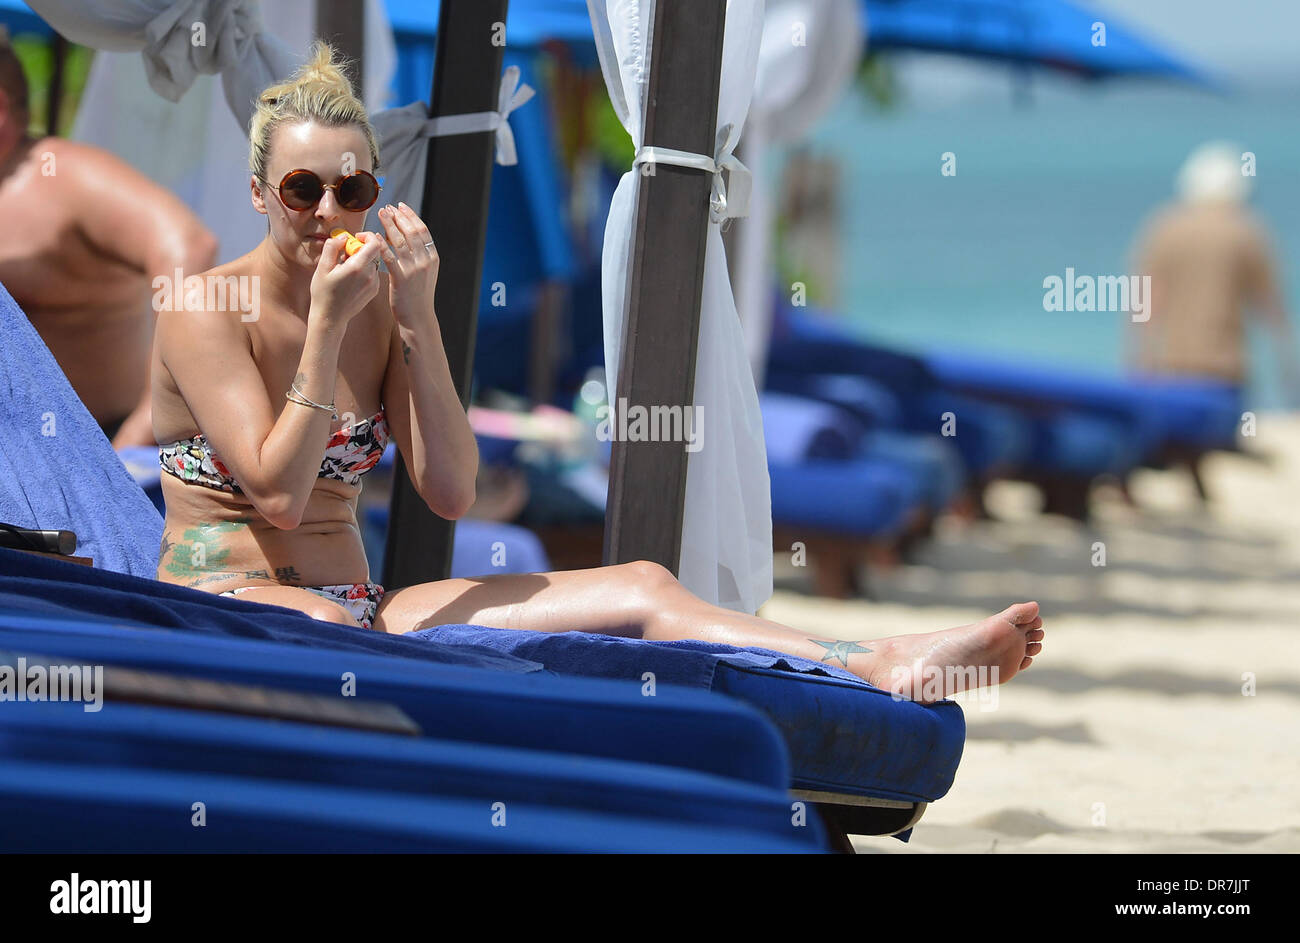 Fearne Cotton and her boyfriend Jesse Wood  spend time relaxing on the beach together during their holiday  Barbados - 15.06.12 Stock Photo